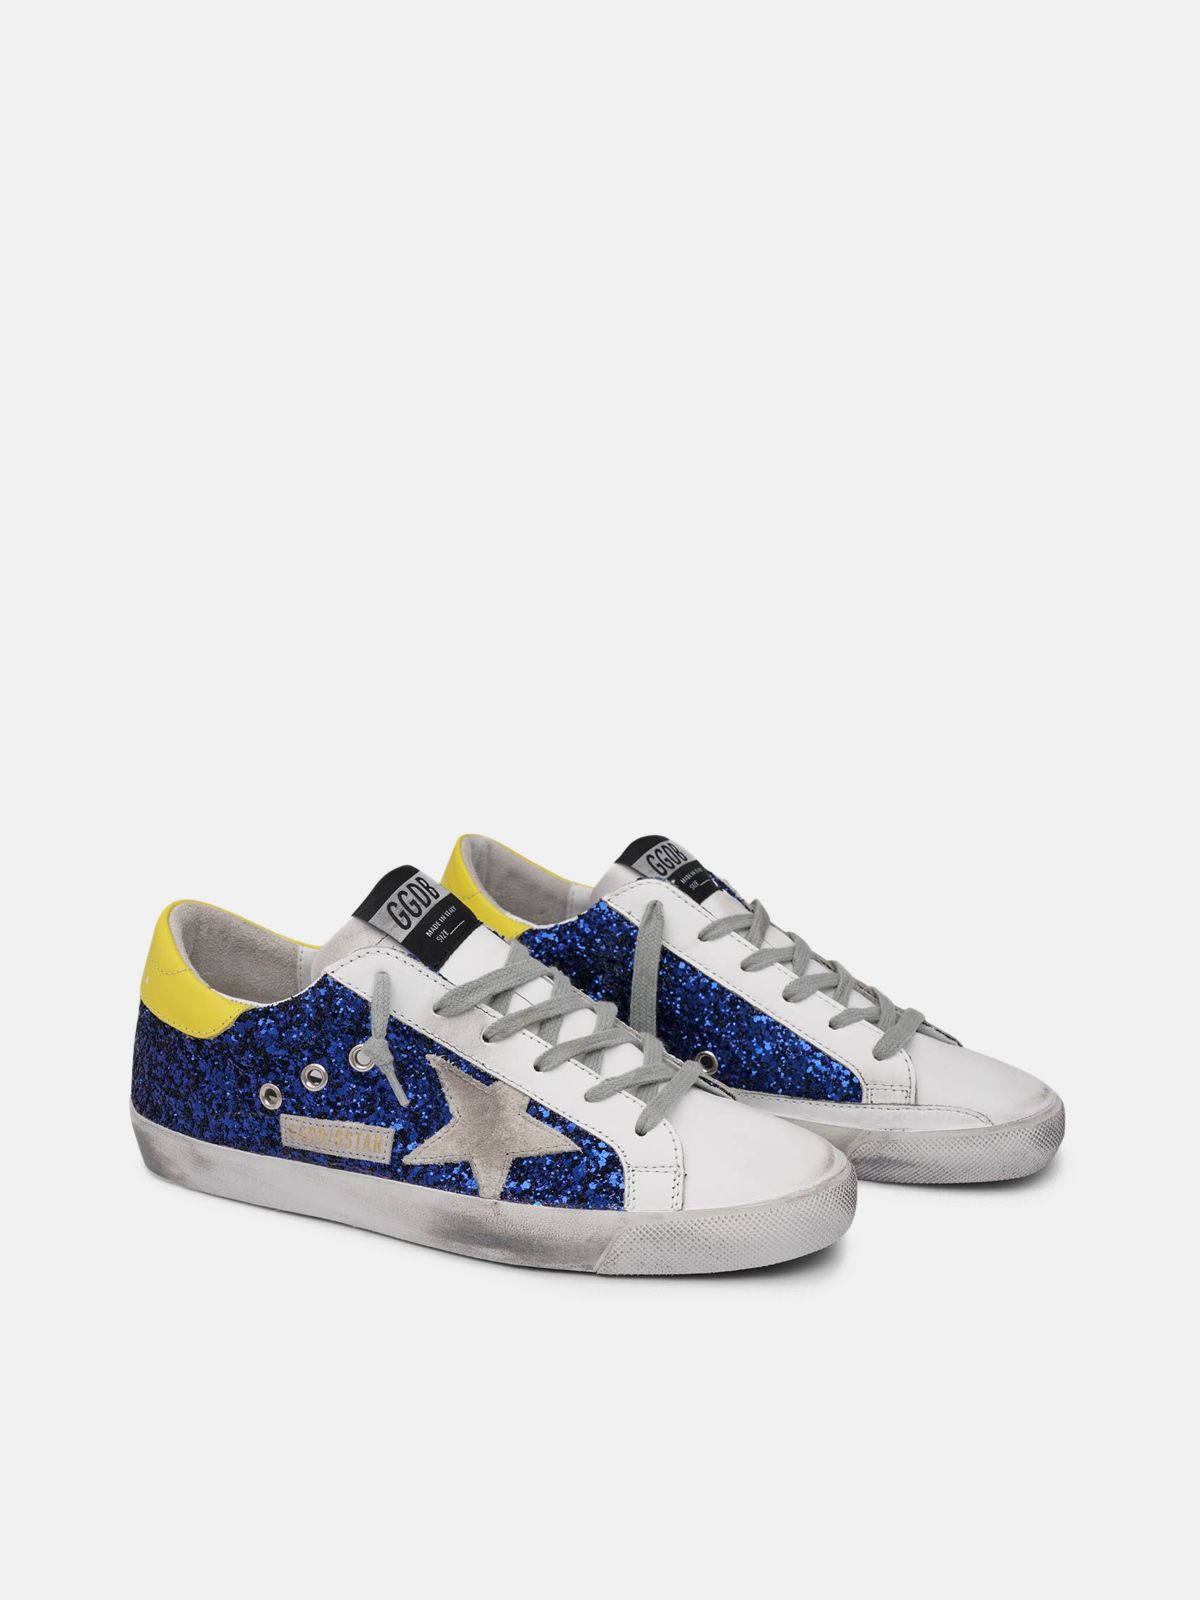 Super-Star sneakers with blue glitter and yellow heel tab | Golden Goose